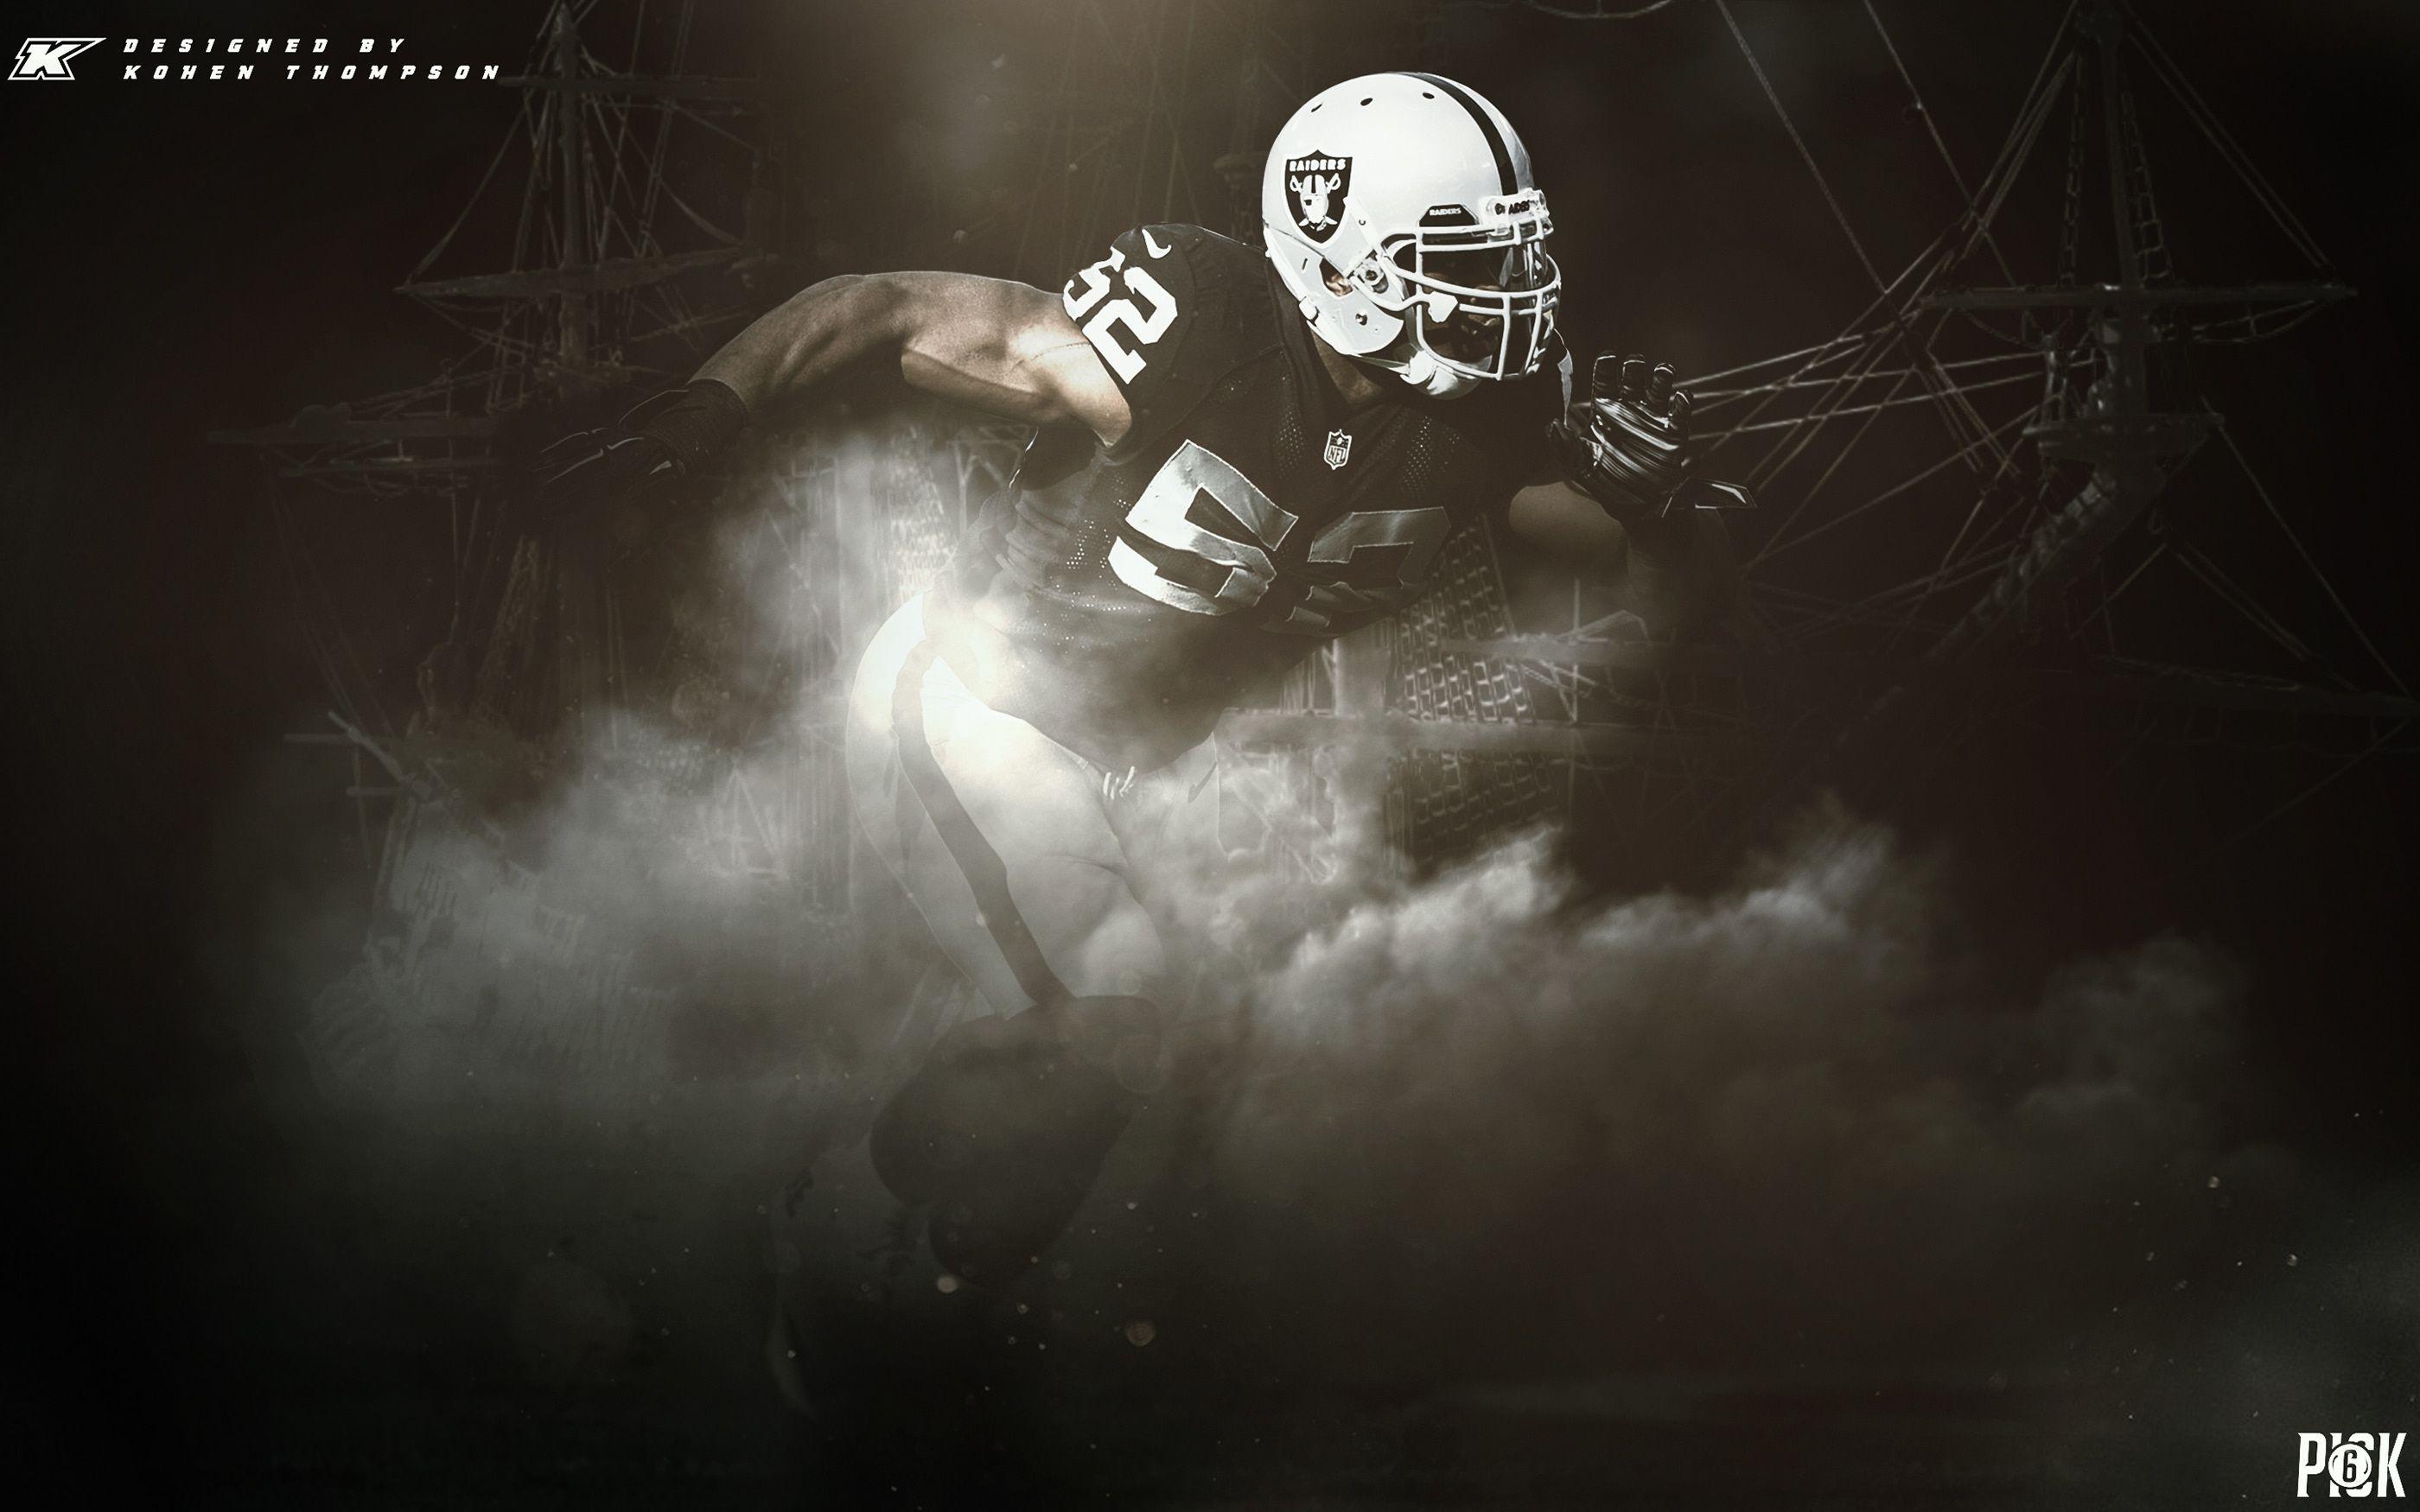 Download wallpapers Khalil Mack american football Oakland Raiders NFL  National Football League for desktop free Pictures for desktop free